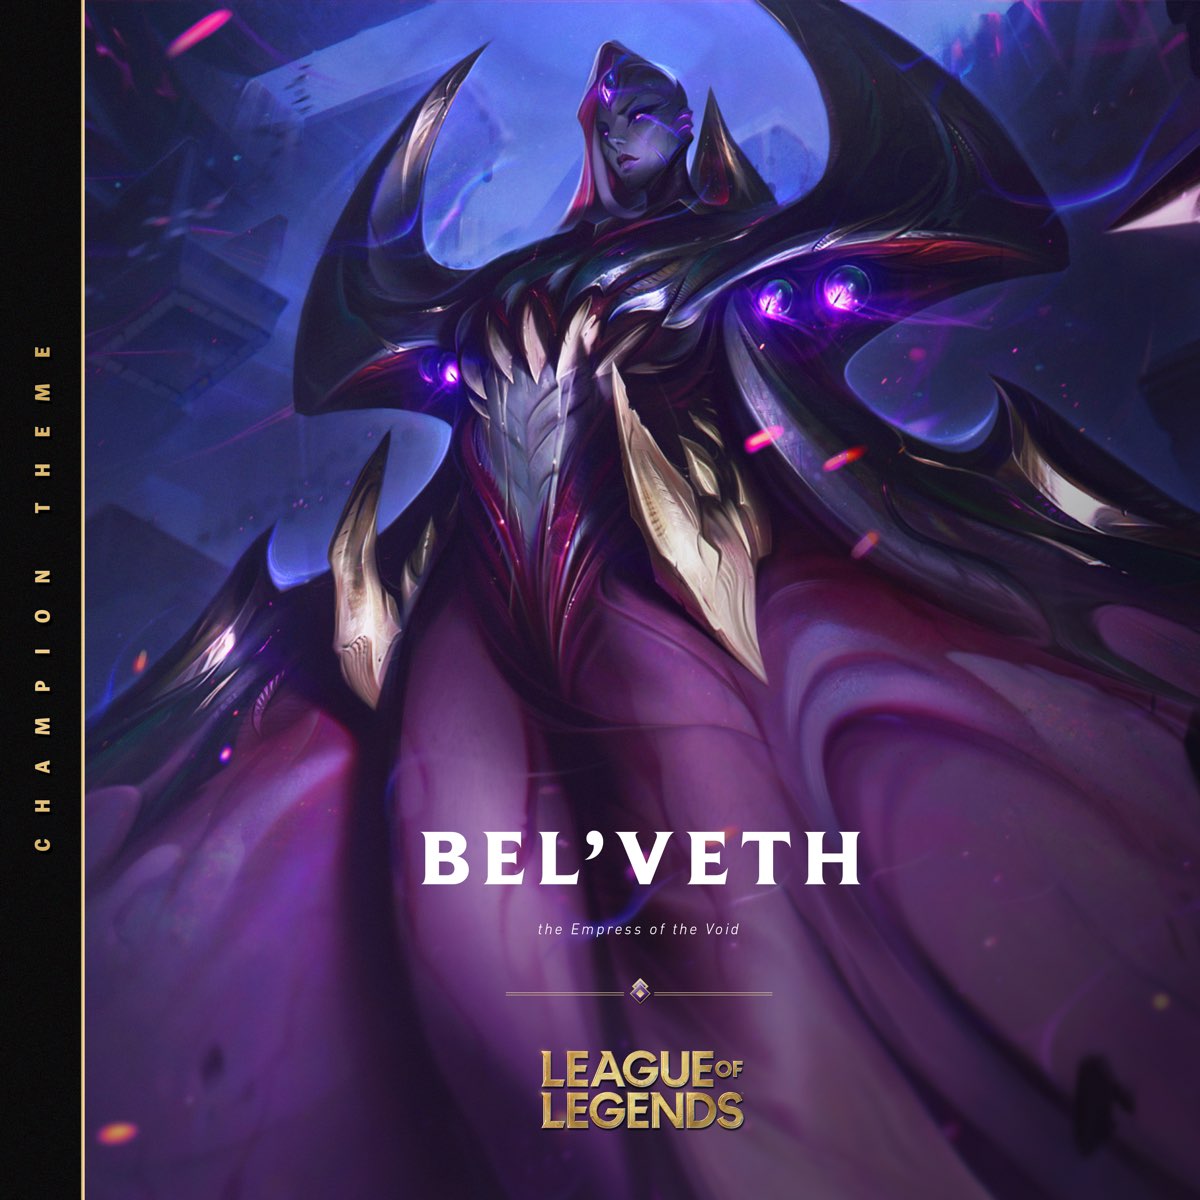 ‎Bel'veth, the Empress of the Void - Single by League of Legends on ...